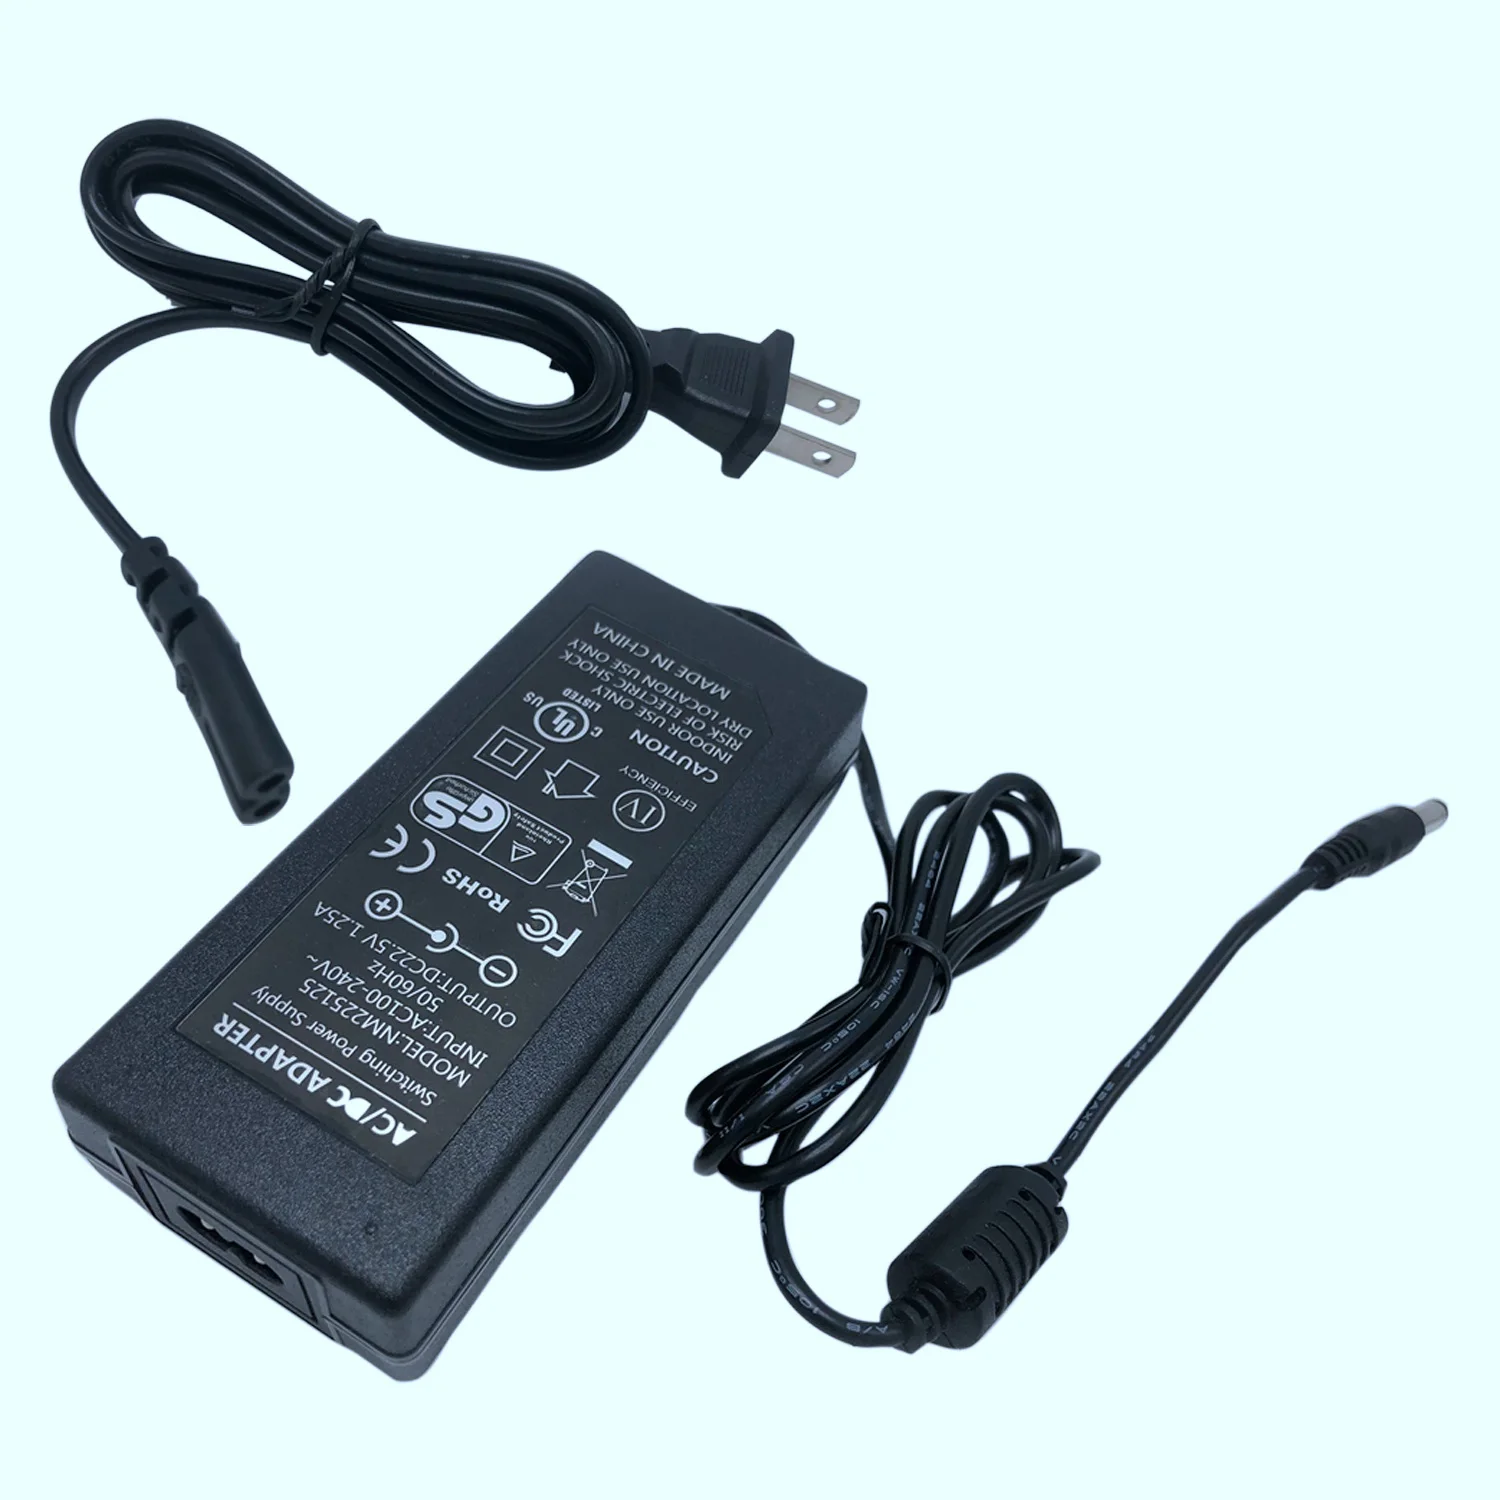 for Roomba Charger 22.5V 1.25A AC Adapter Fast Battery Charger for IRobot Roomba Series,US Plug